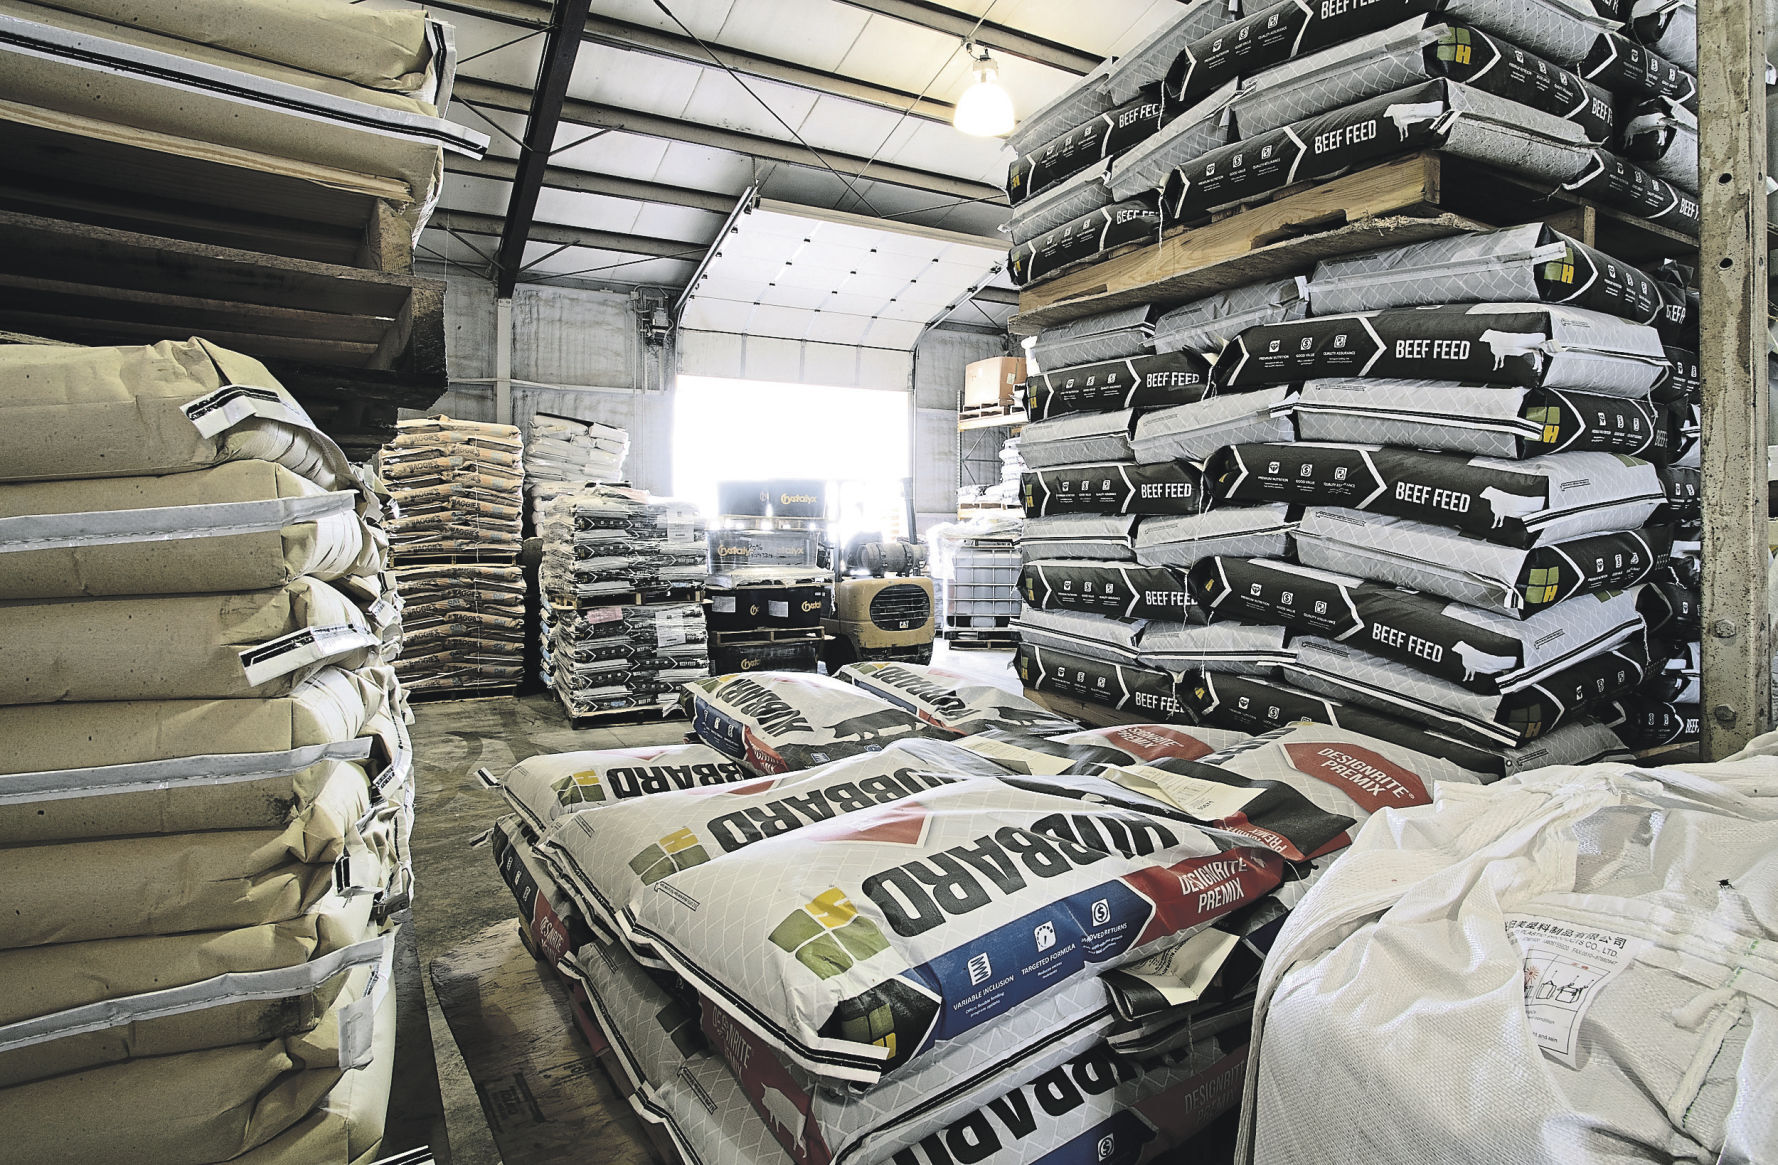 Bags of feed are stacked in the warehouse.    PHOTO CREDIT: Stephen Gassman